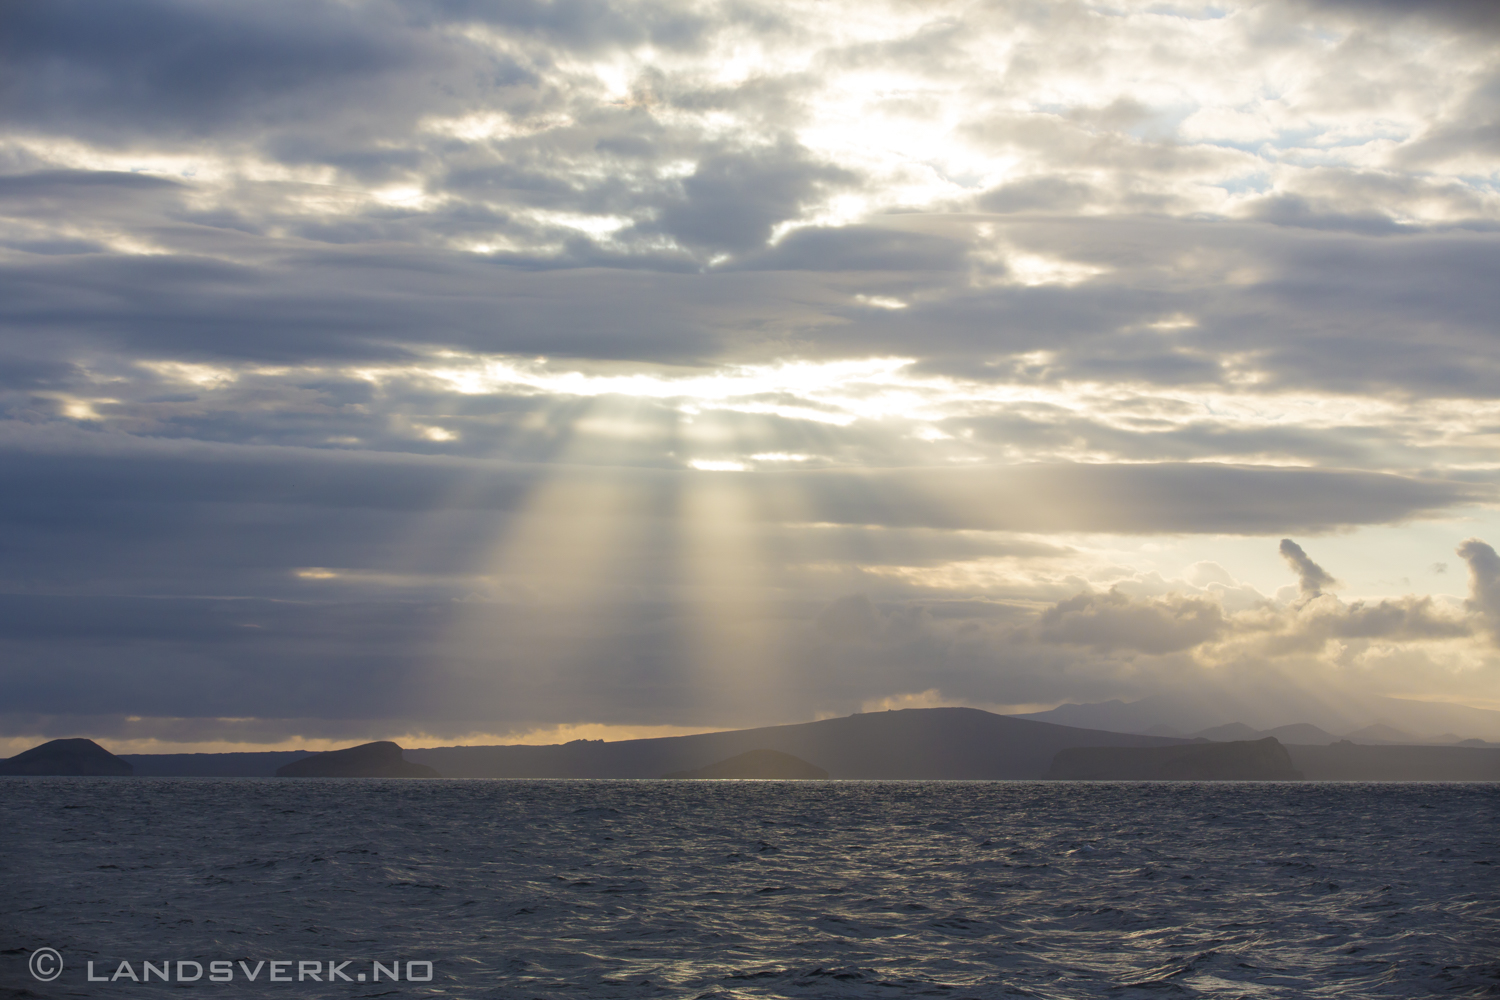 The end of our Galapagos tour.. 

(Canon EOS 5D Mark III / Canon EF 70-200mm f/2.8 L IS II USM)